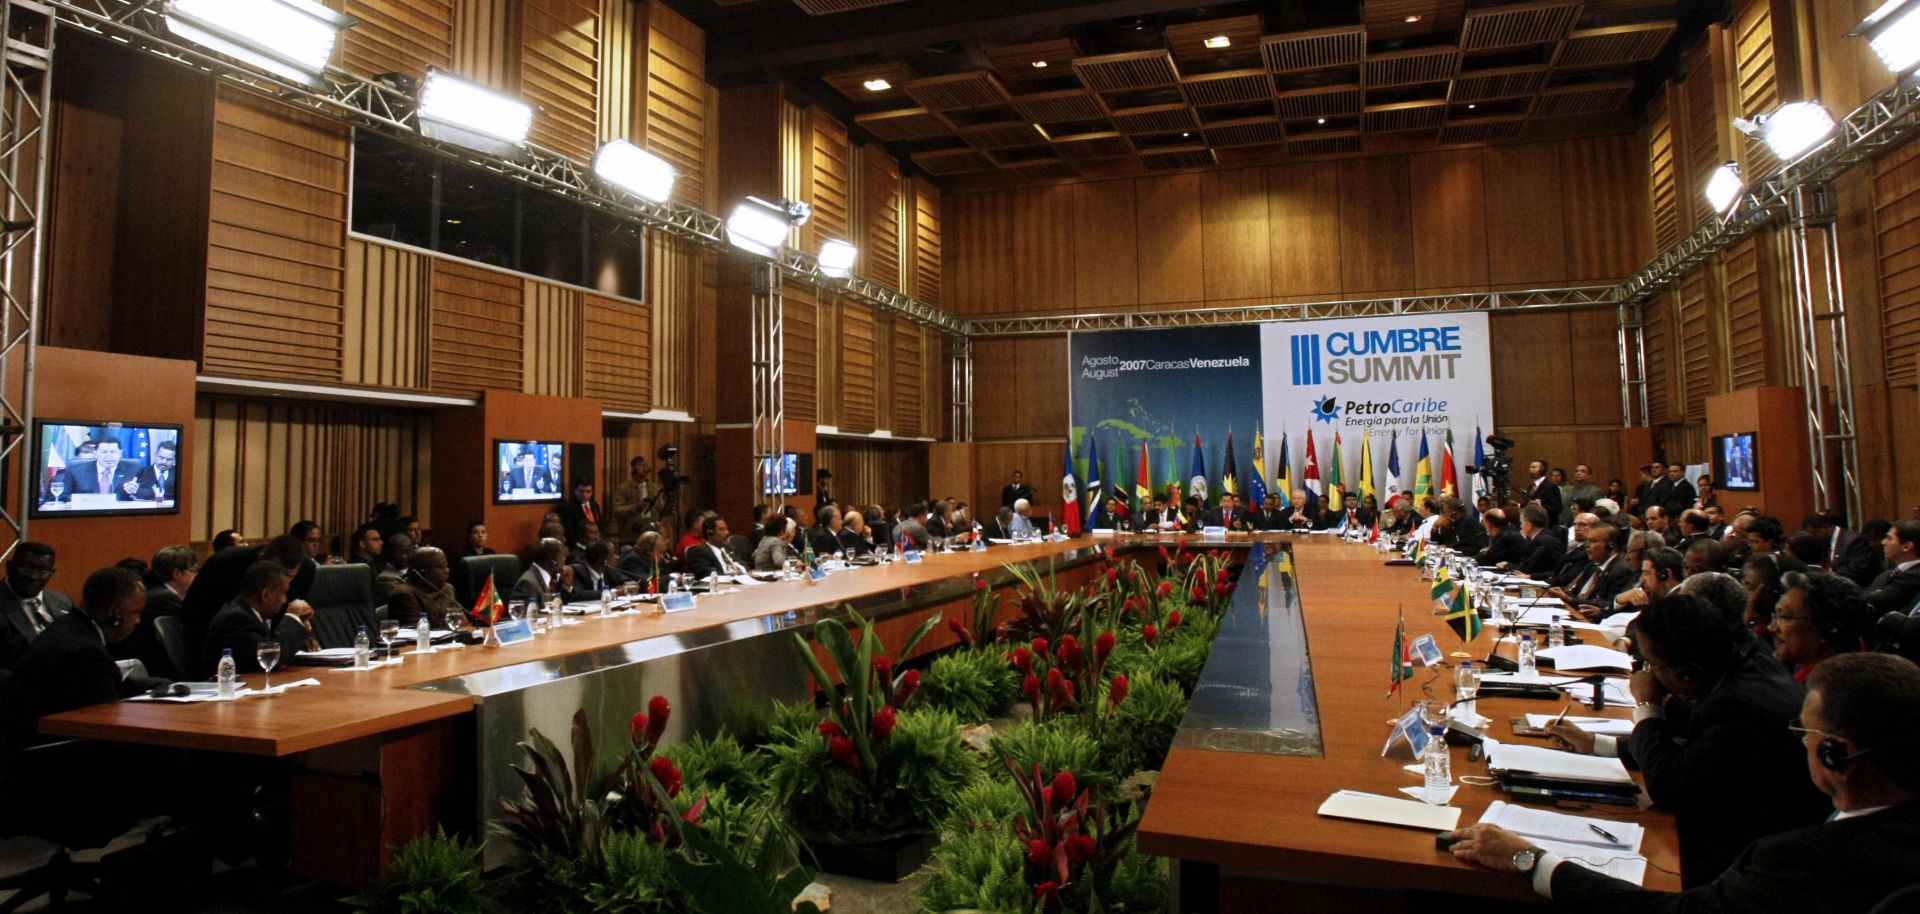 Guyana is a member of Petrocaribe, an alliance between Venezuela and Caribbean countries. The alliance's third summit was held in Caracas, Venezuela, in 2007.